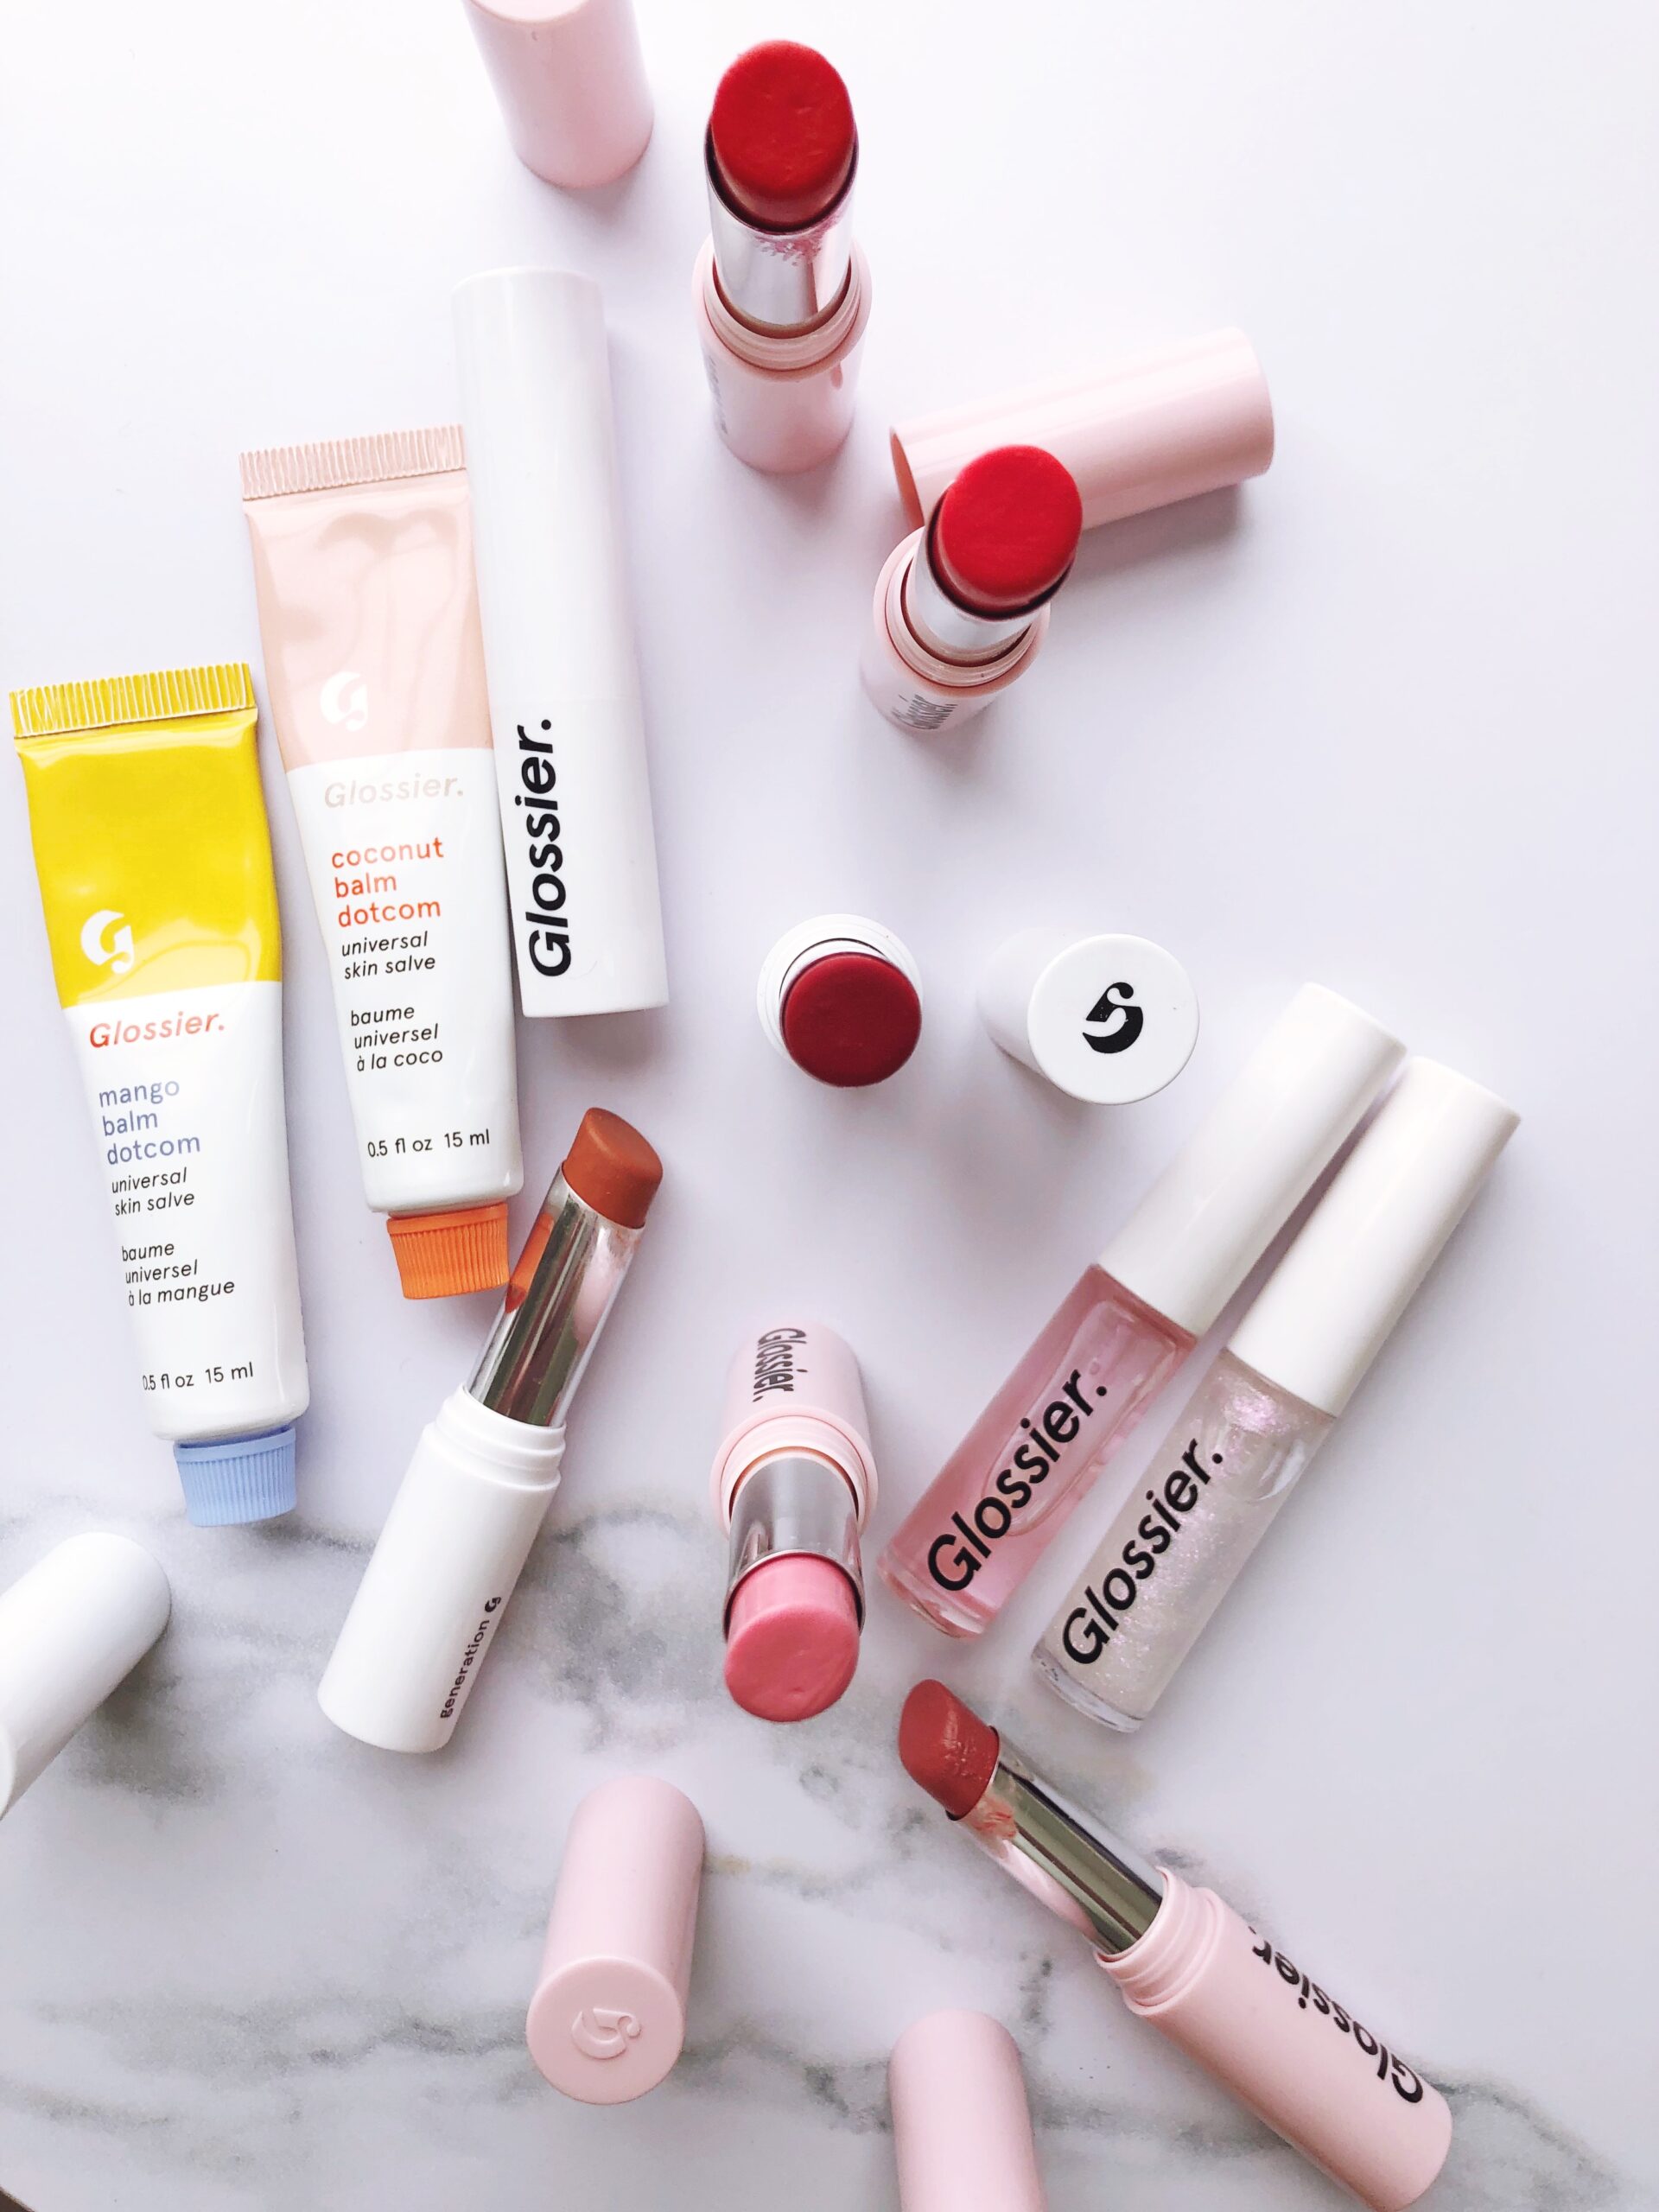 Top 5 Best Glossier Lip Products for Summer The Beauty Minimalist